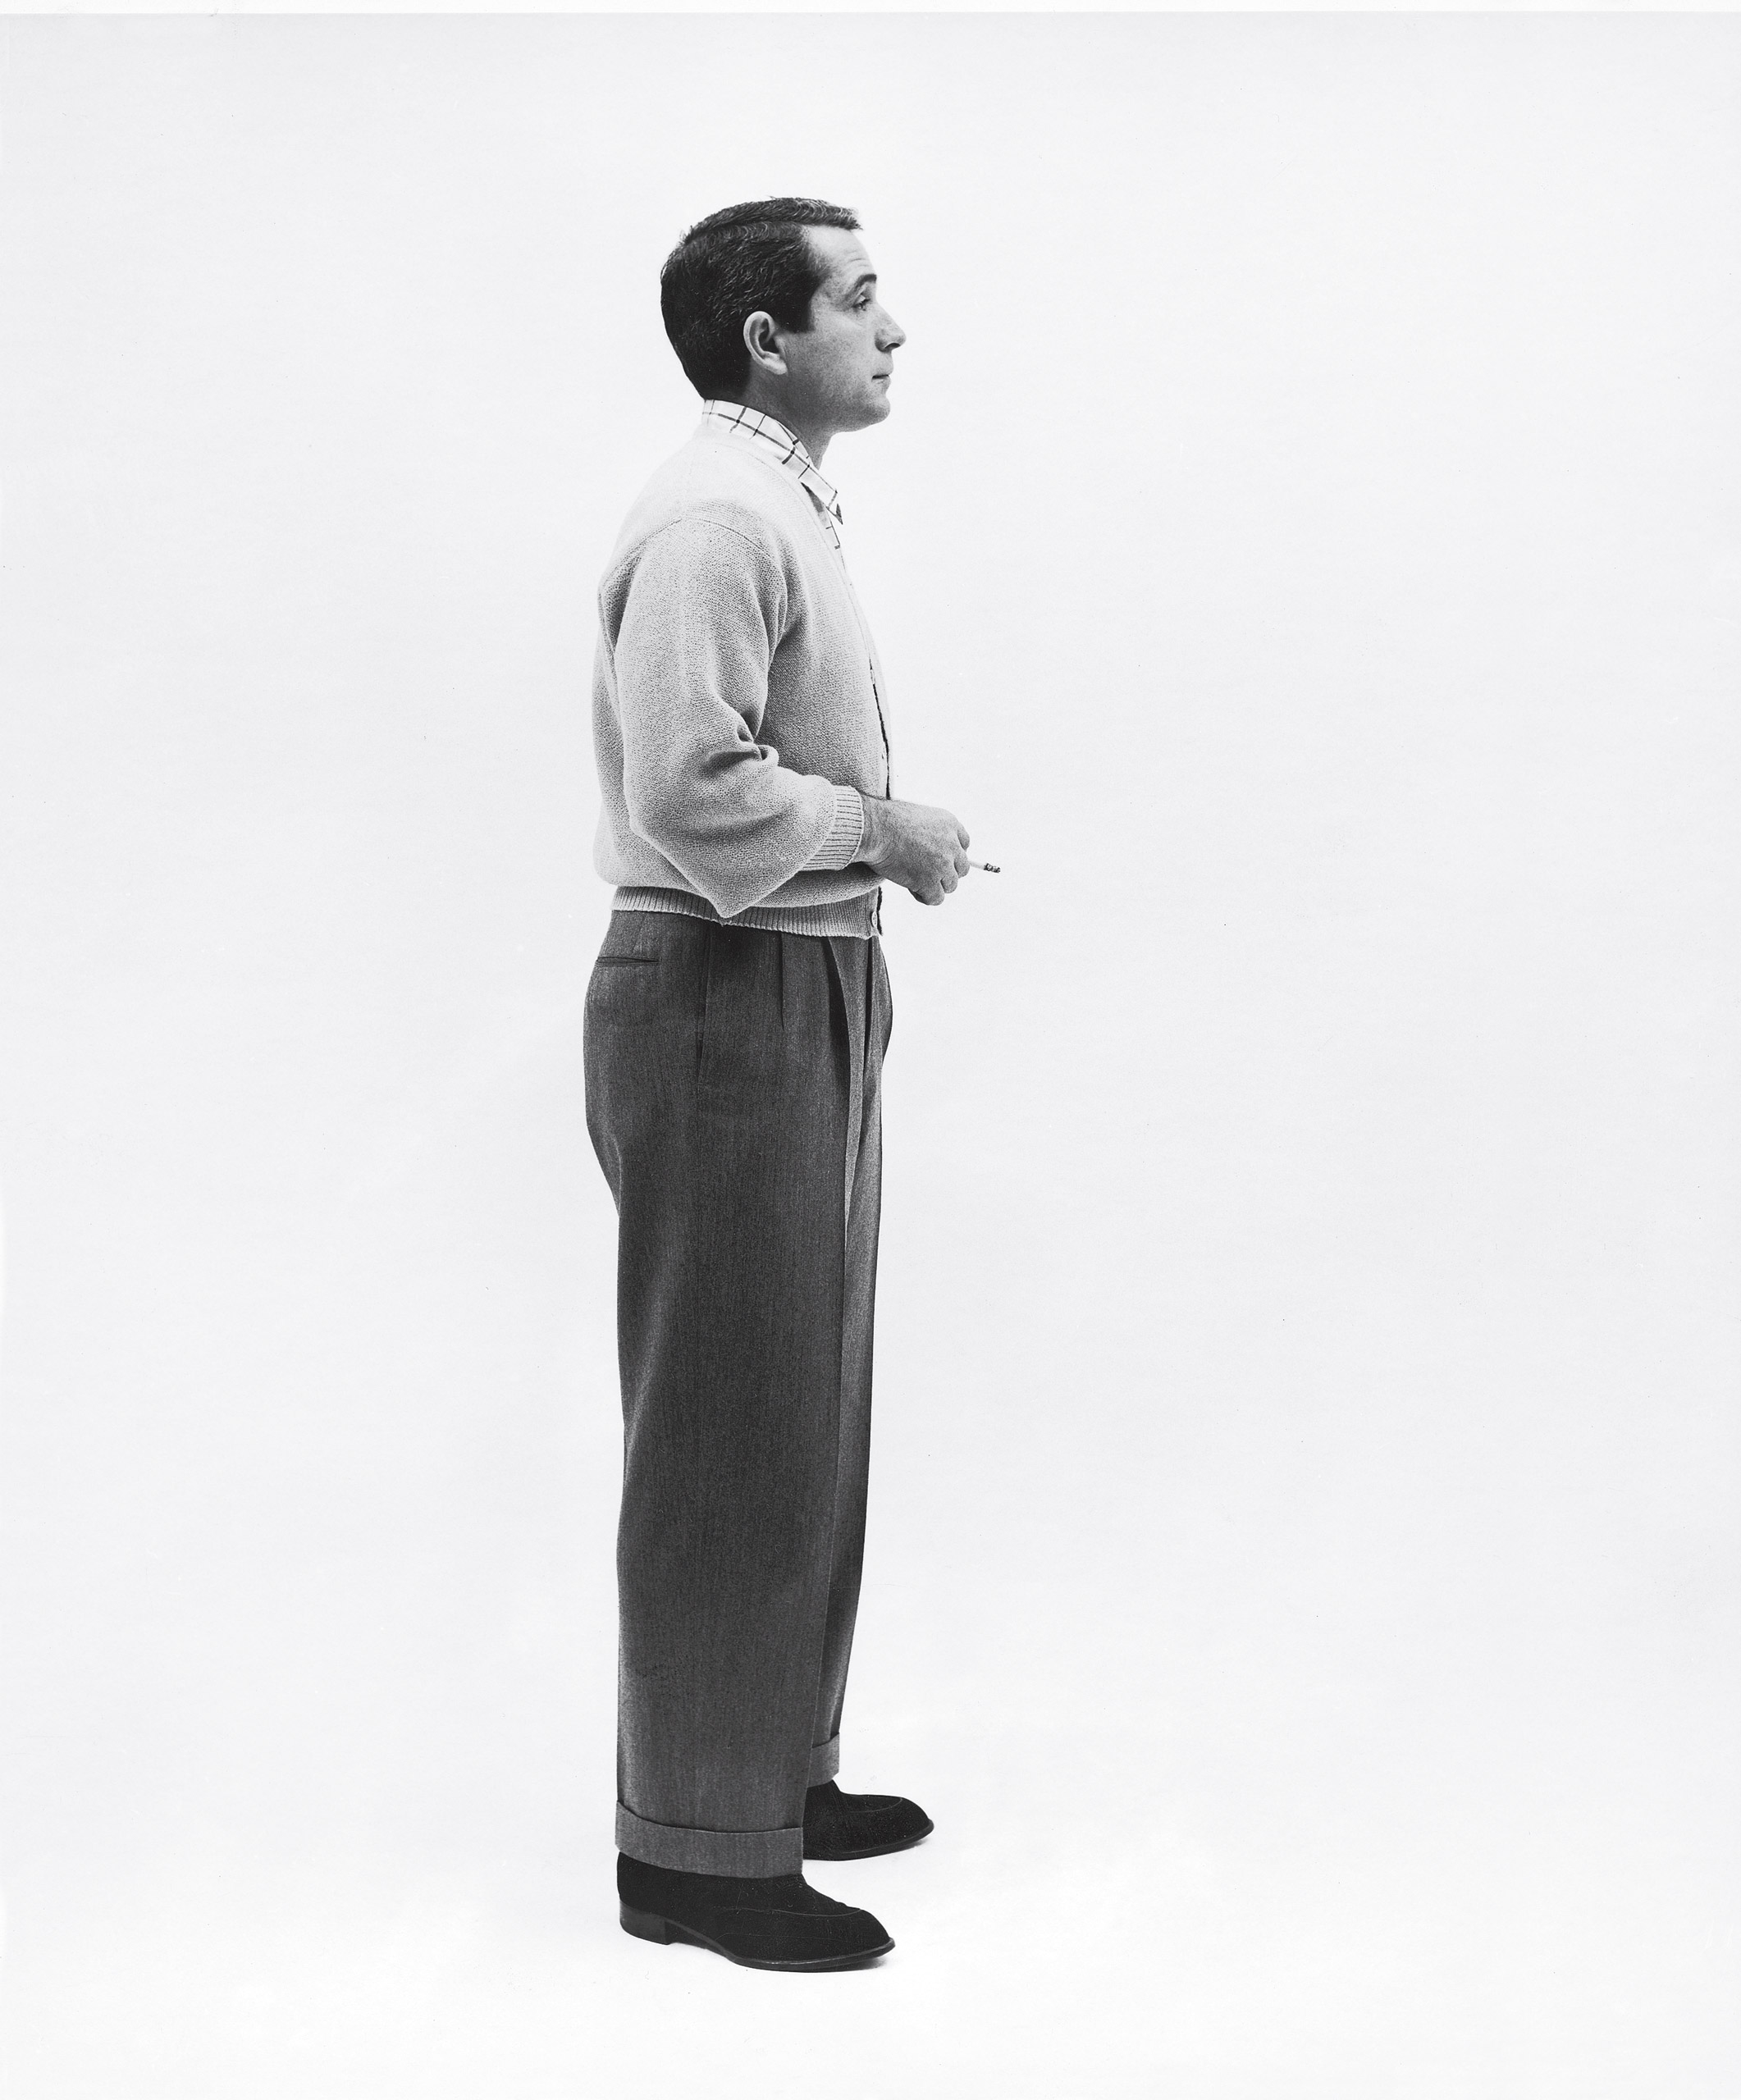 20-year olds' ideal: Perry Como, their choice, enacts perfect spouse.